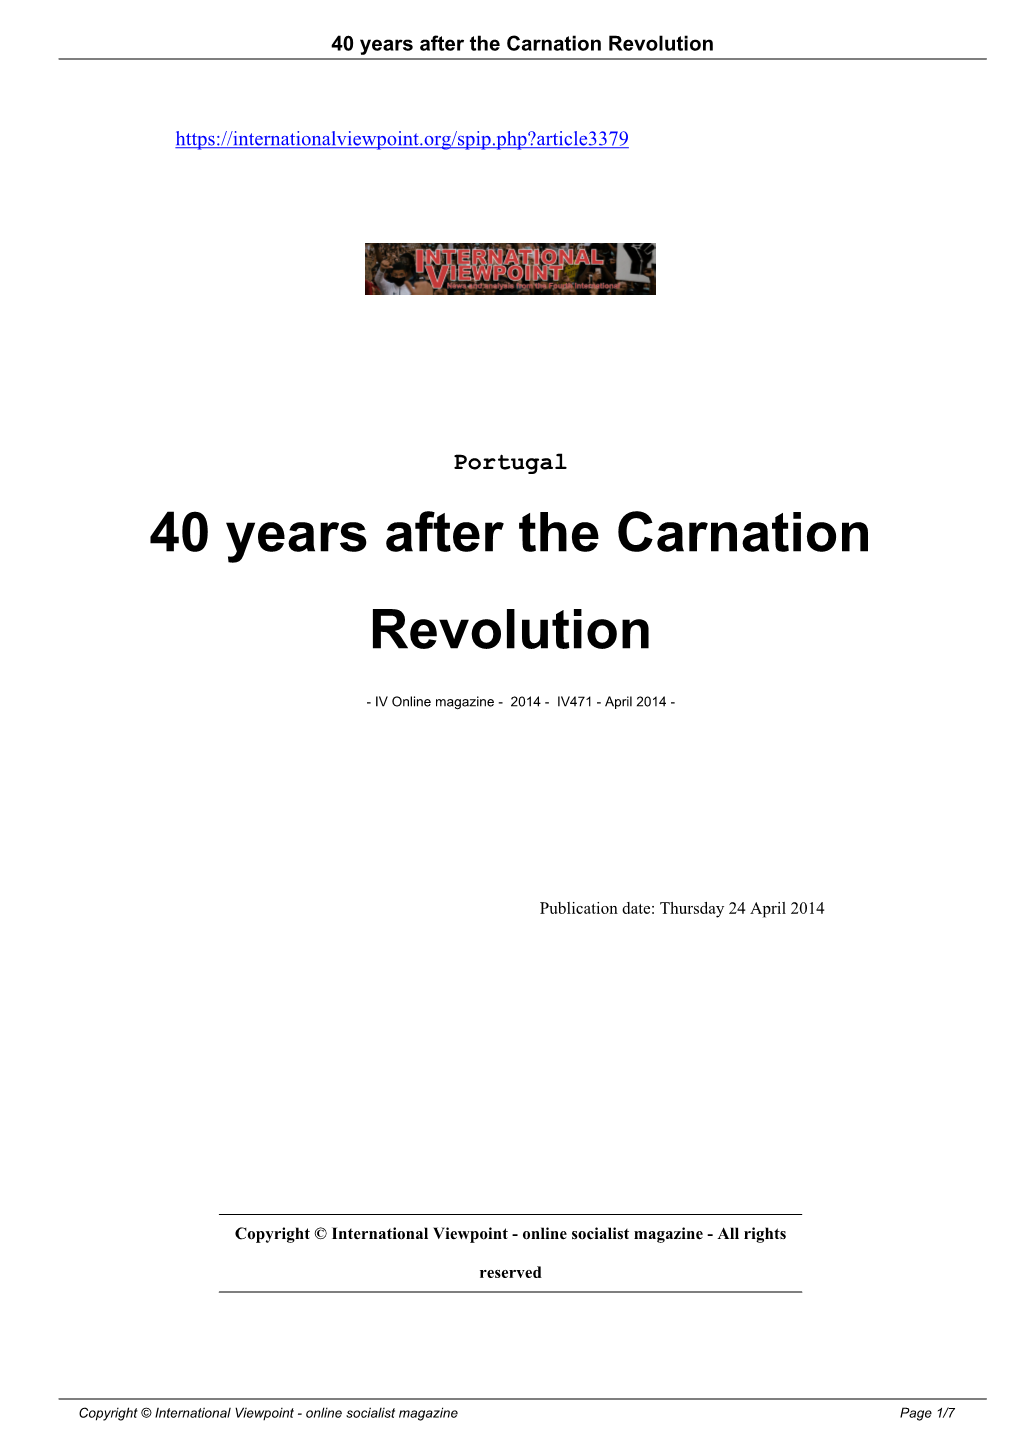 40 Years After the Carnation Revolution